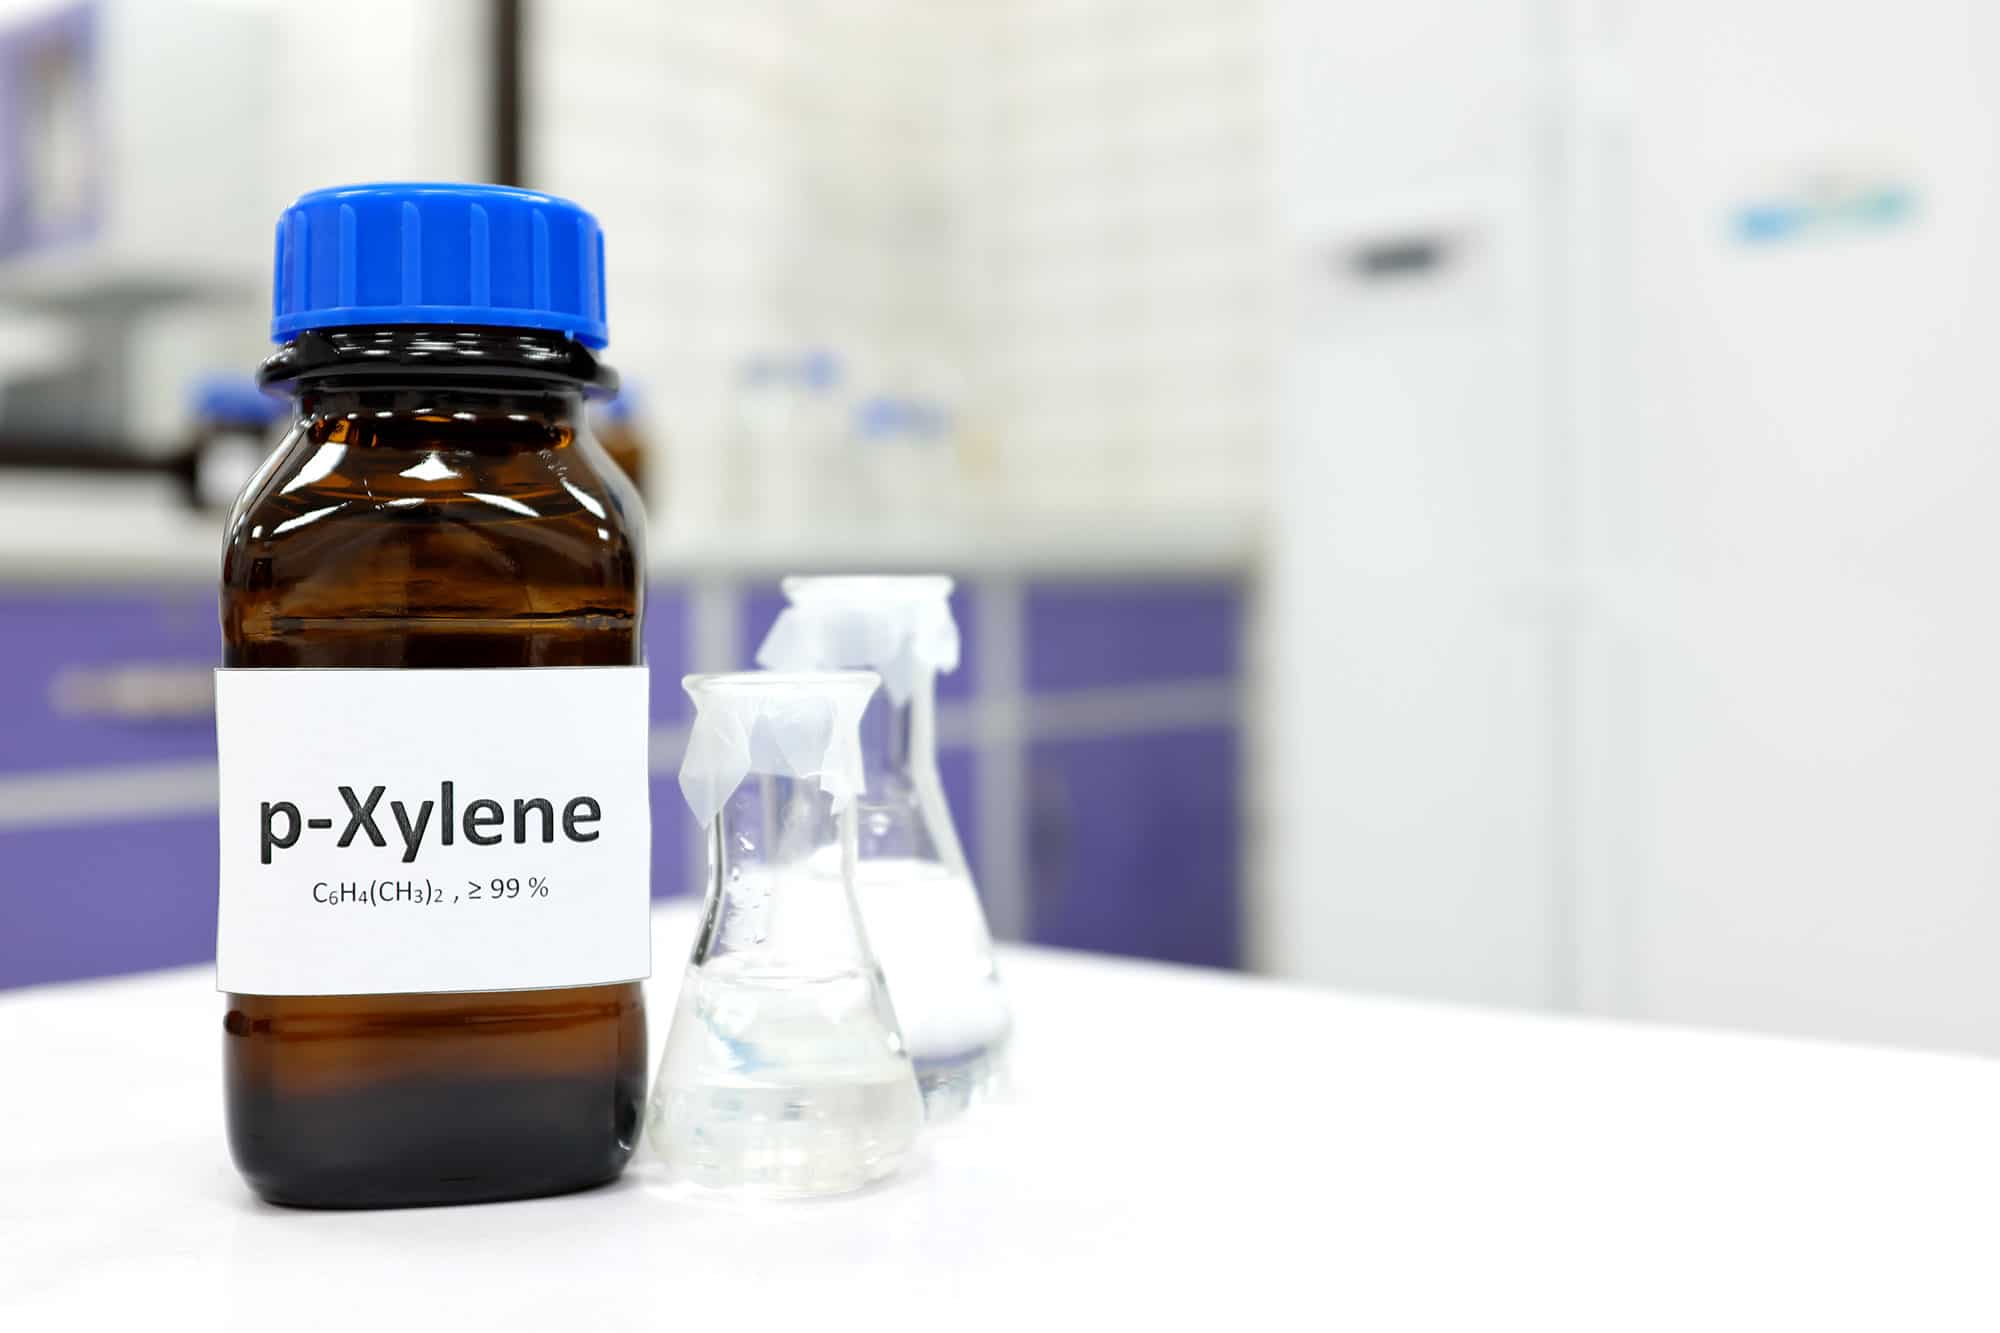 Xylene C6H4(CH3)2 >99% bottle with two clear vials next to it on a lab countertop